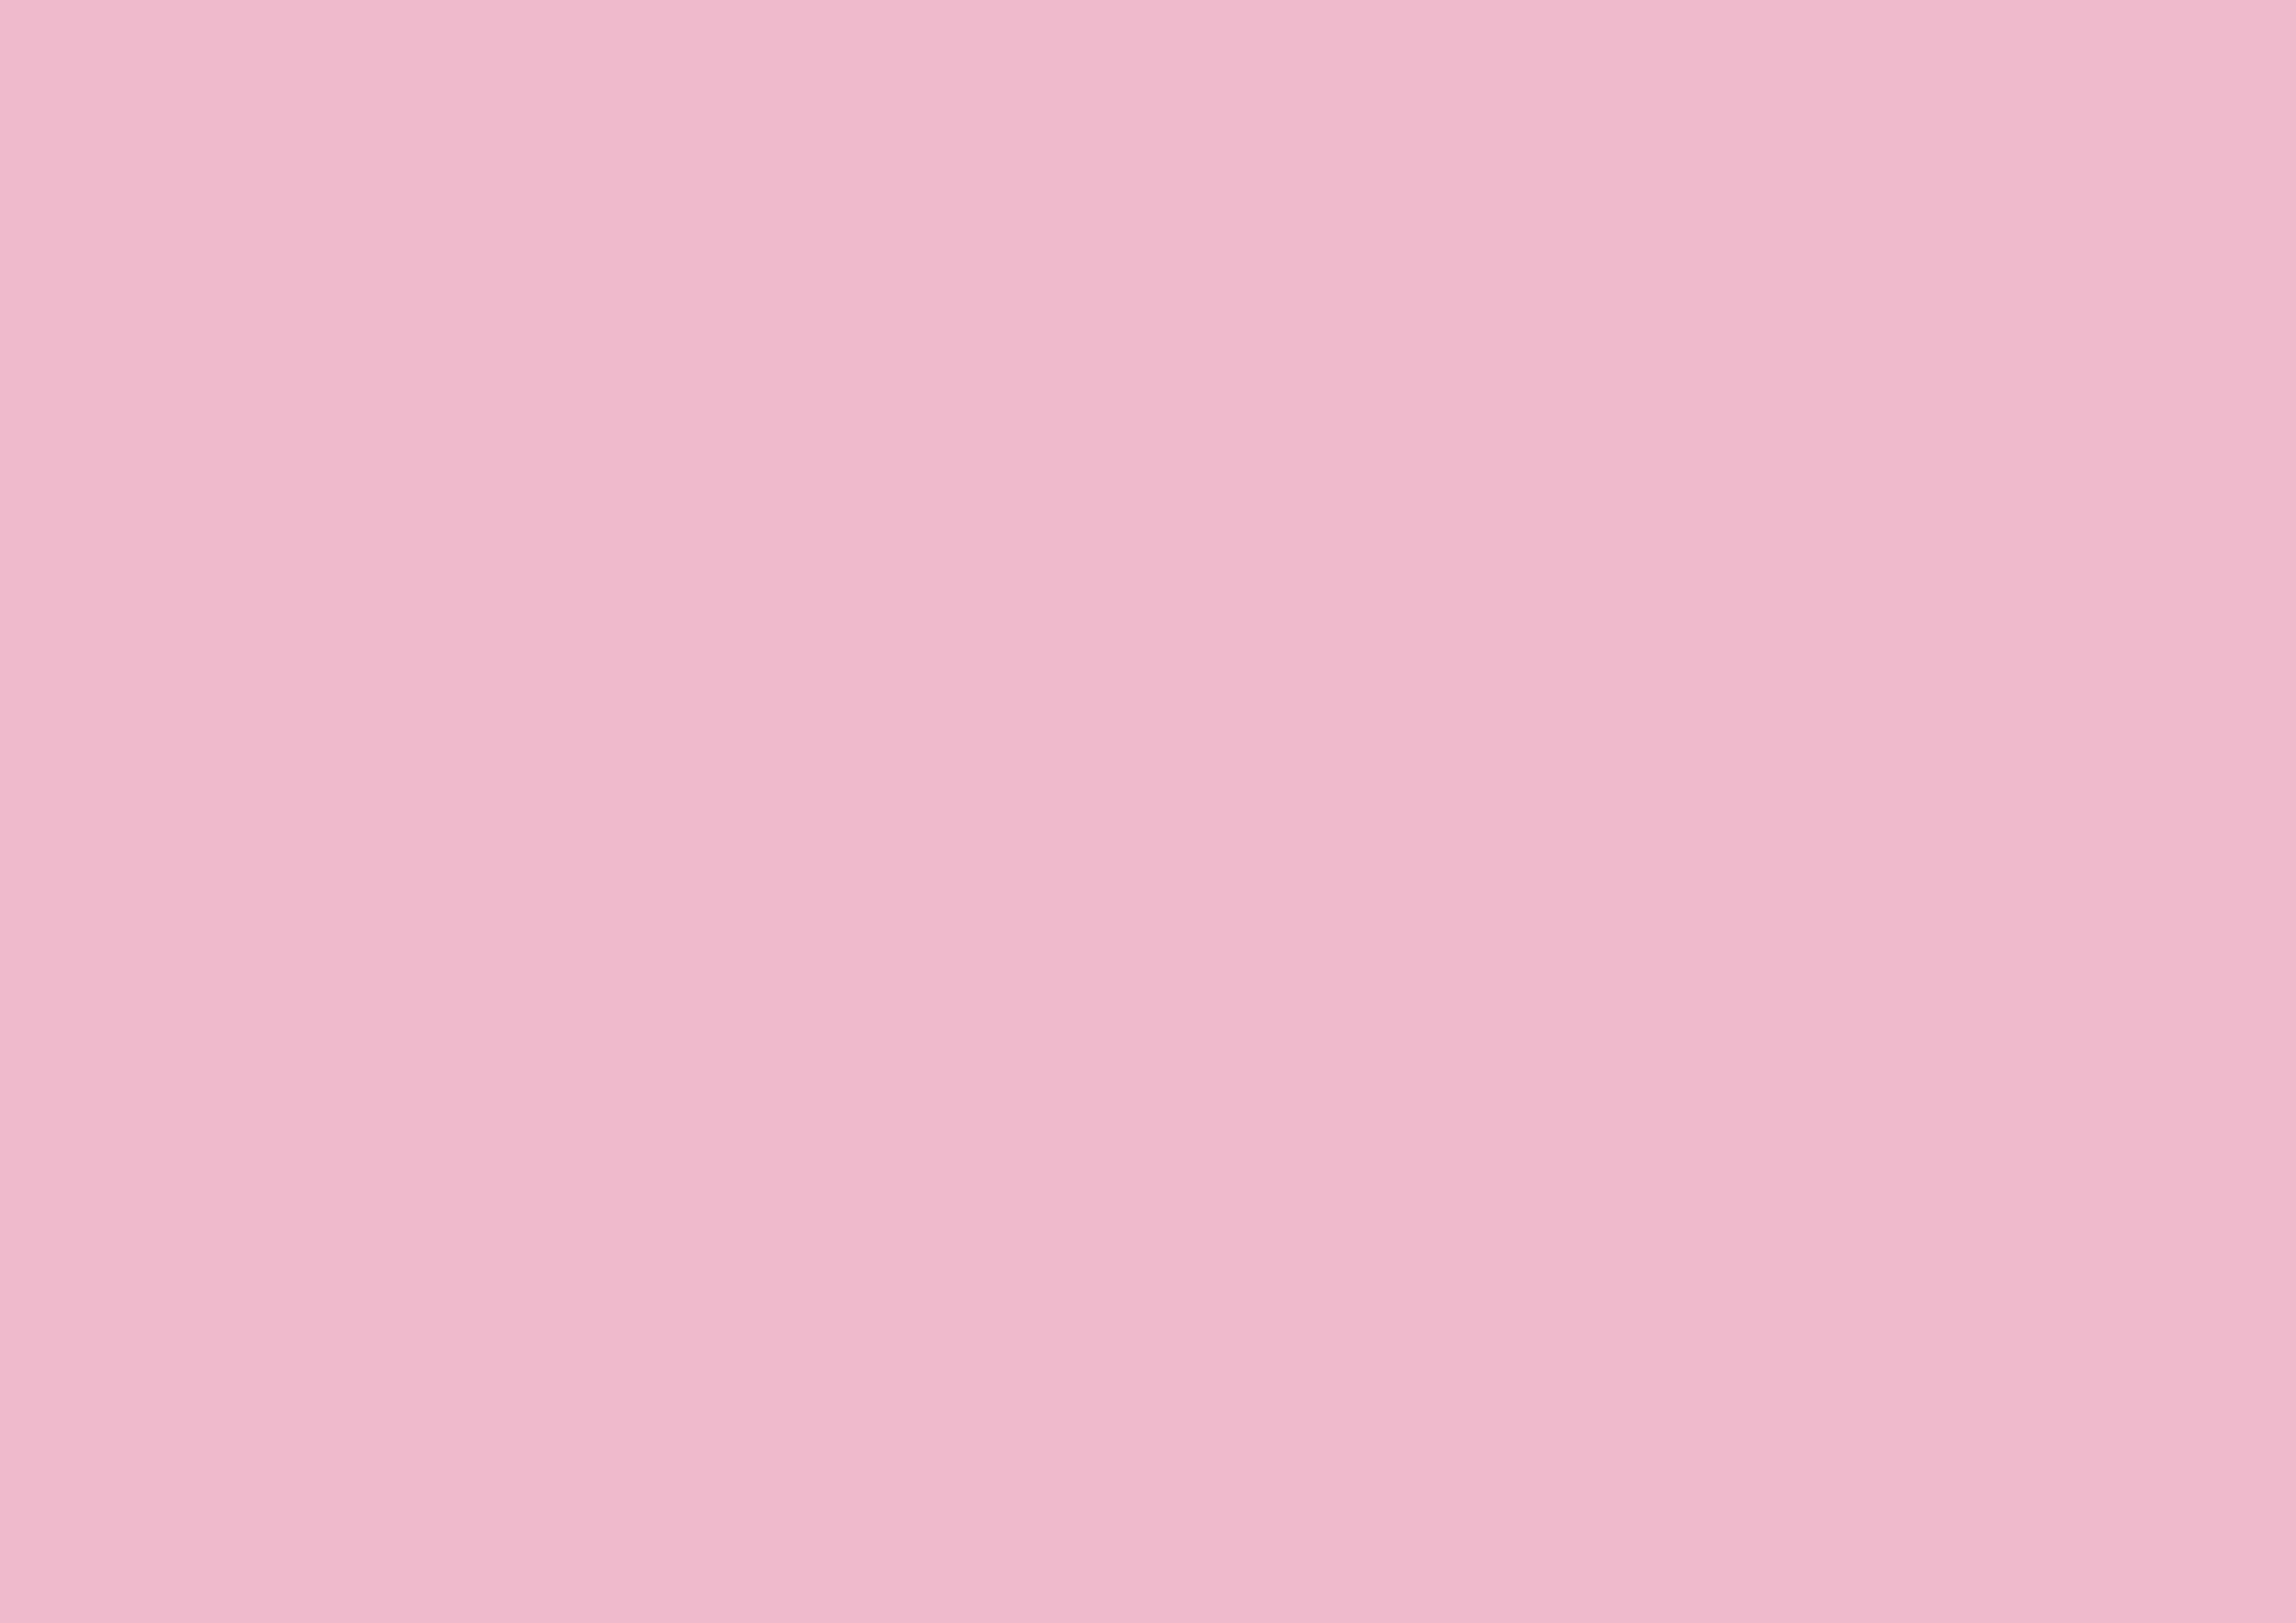 3508x2480 Cameo Pink Solid Color Background